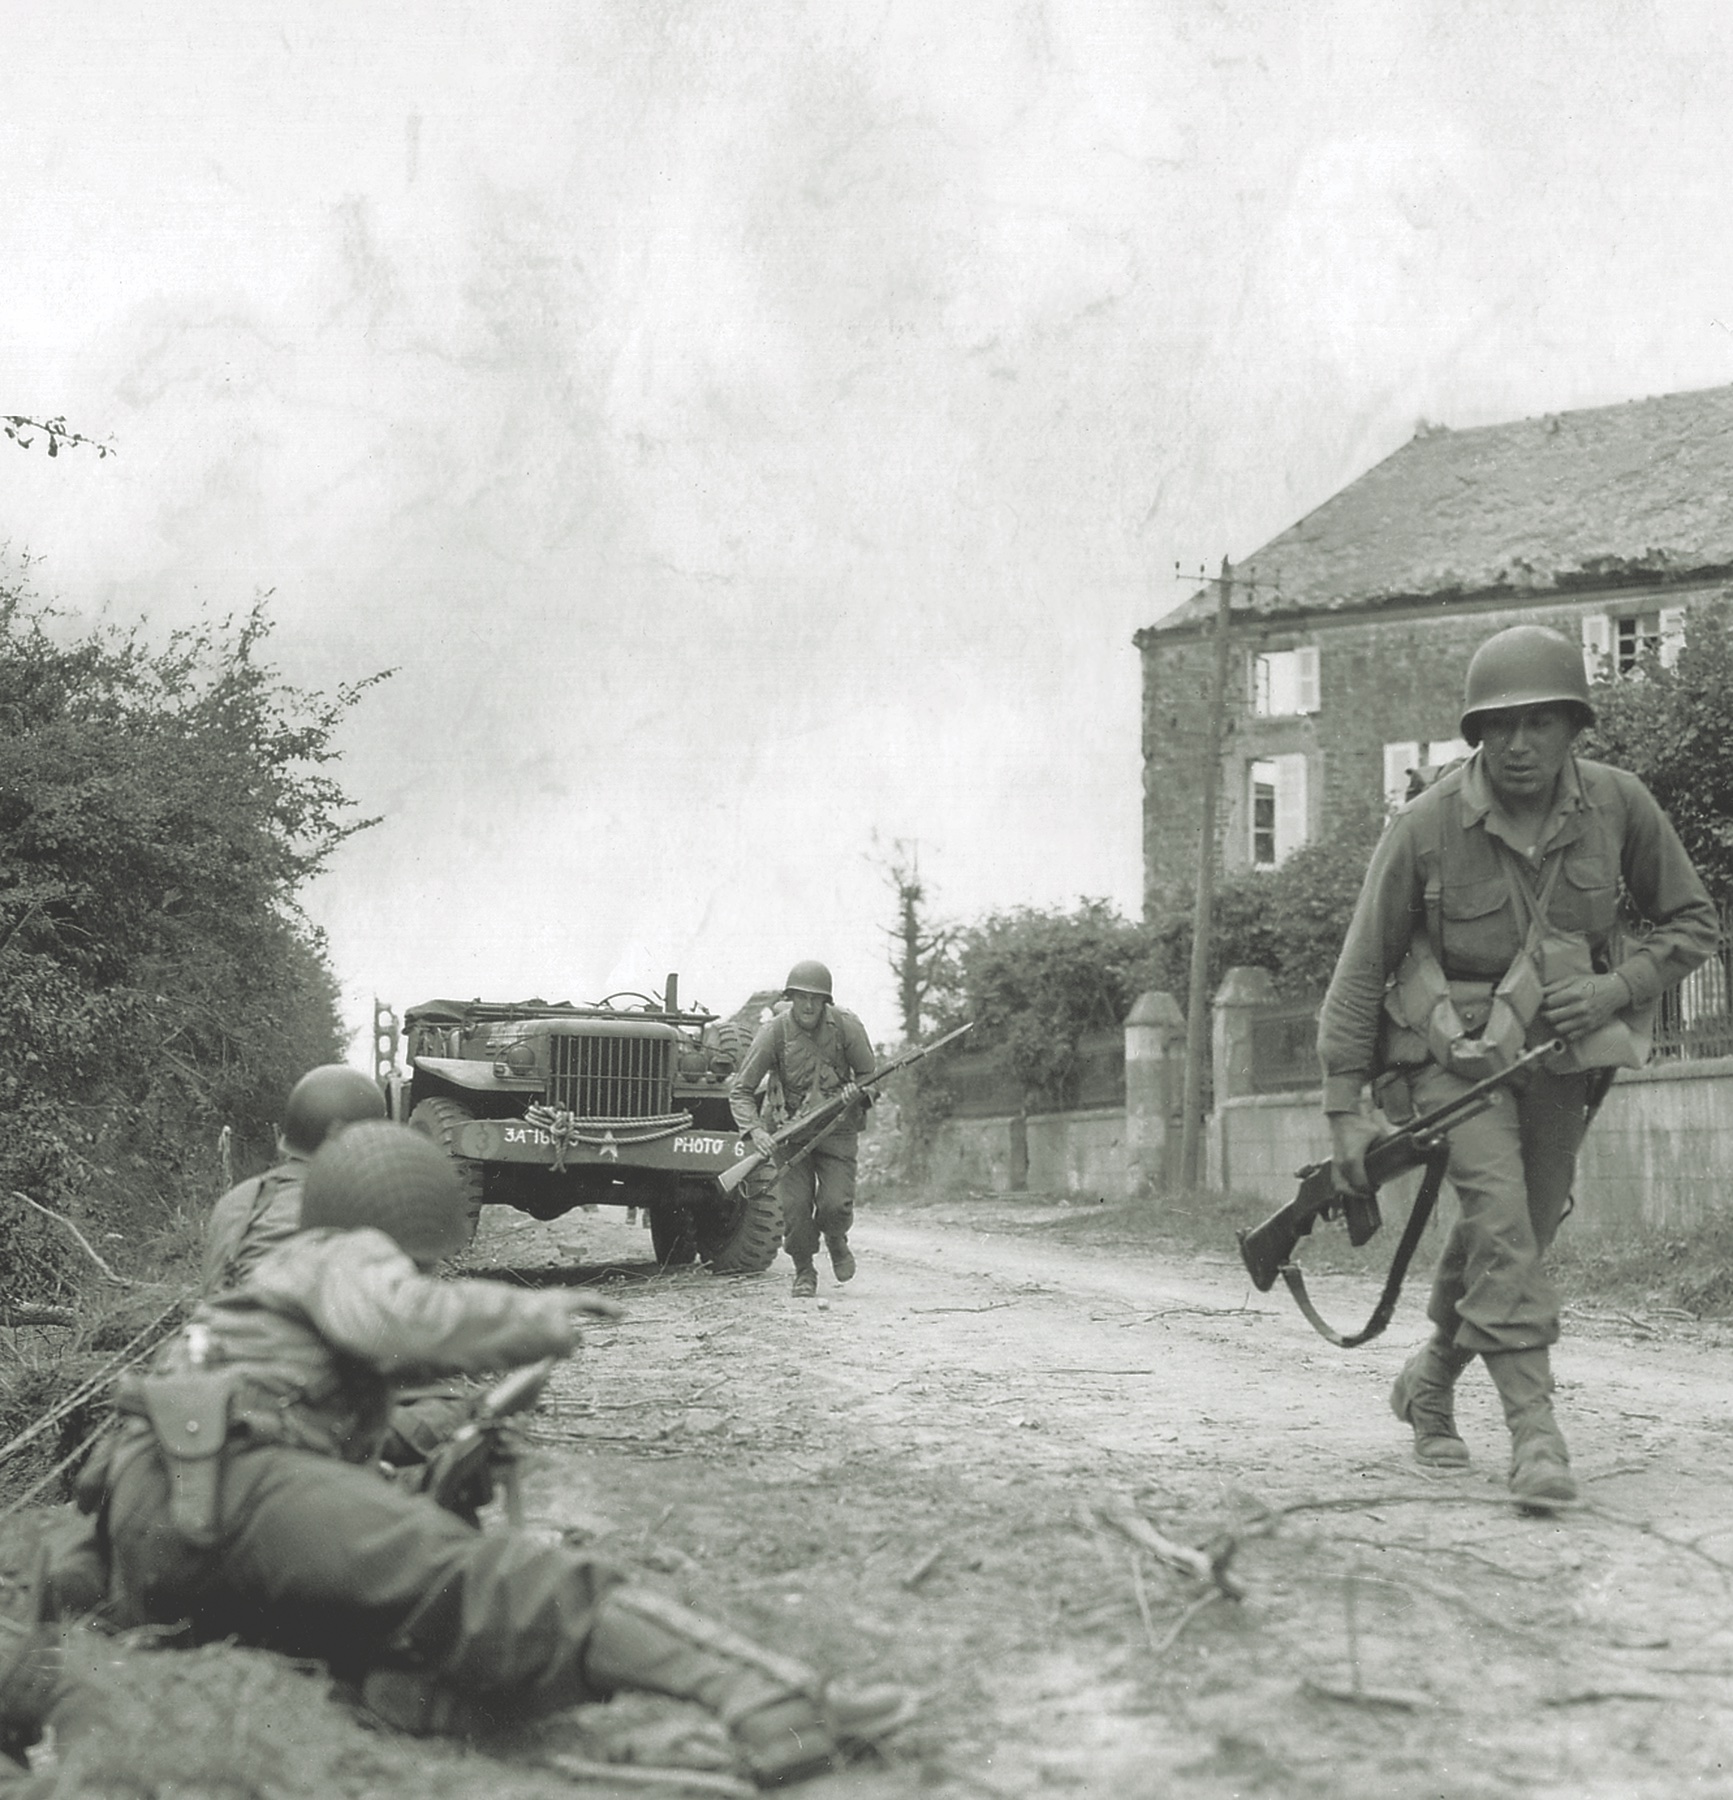 Soldiers of the 79th Division’s 314th Infantry Regiment reenact their assault on the German stronghold at La Haye-du-Puits, France, for an army photographer. (National Archives)